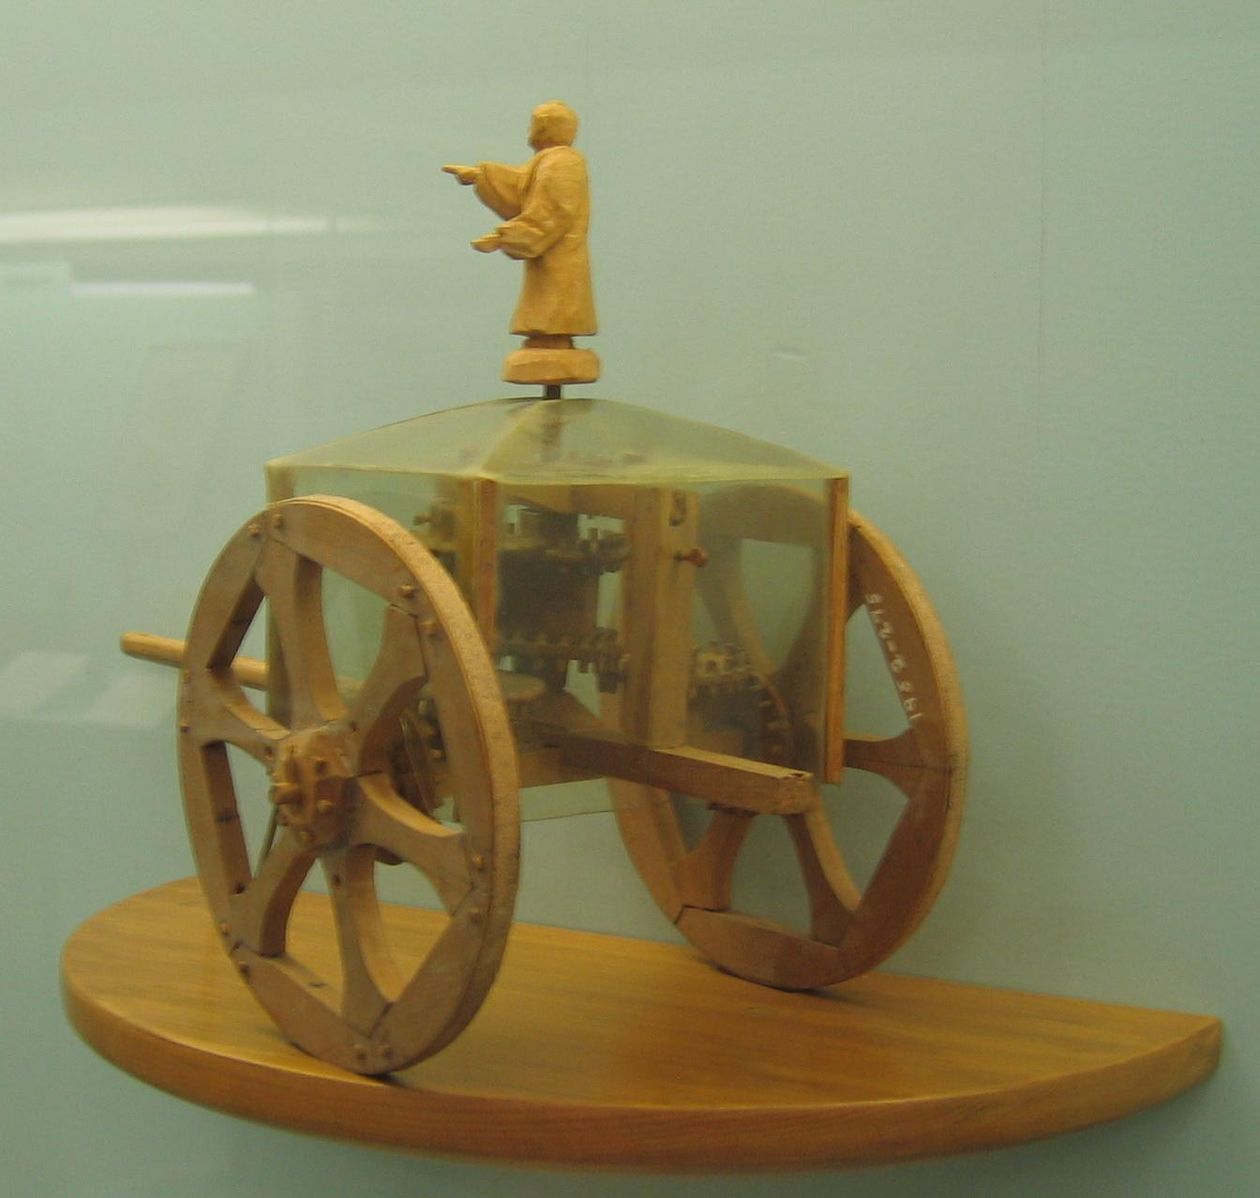 A model of a south-pointing chariot